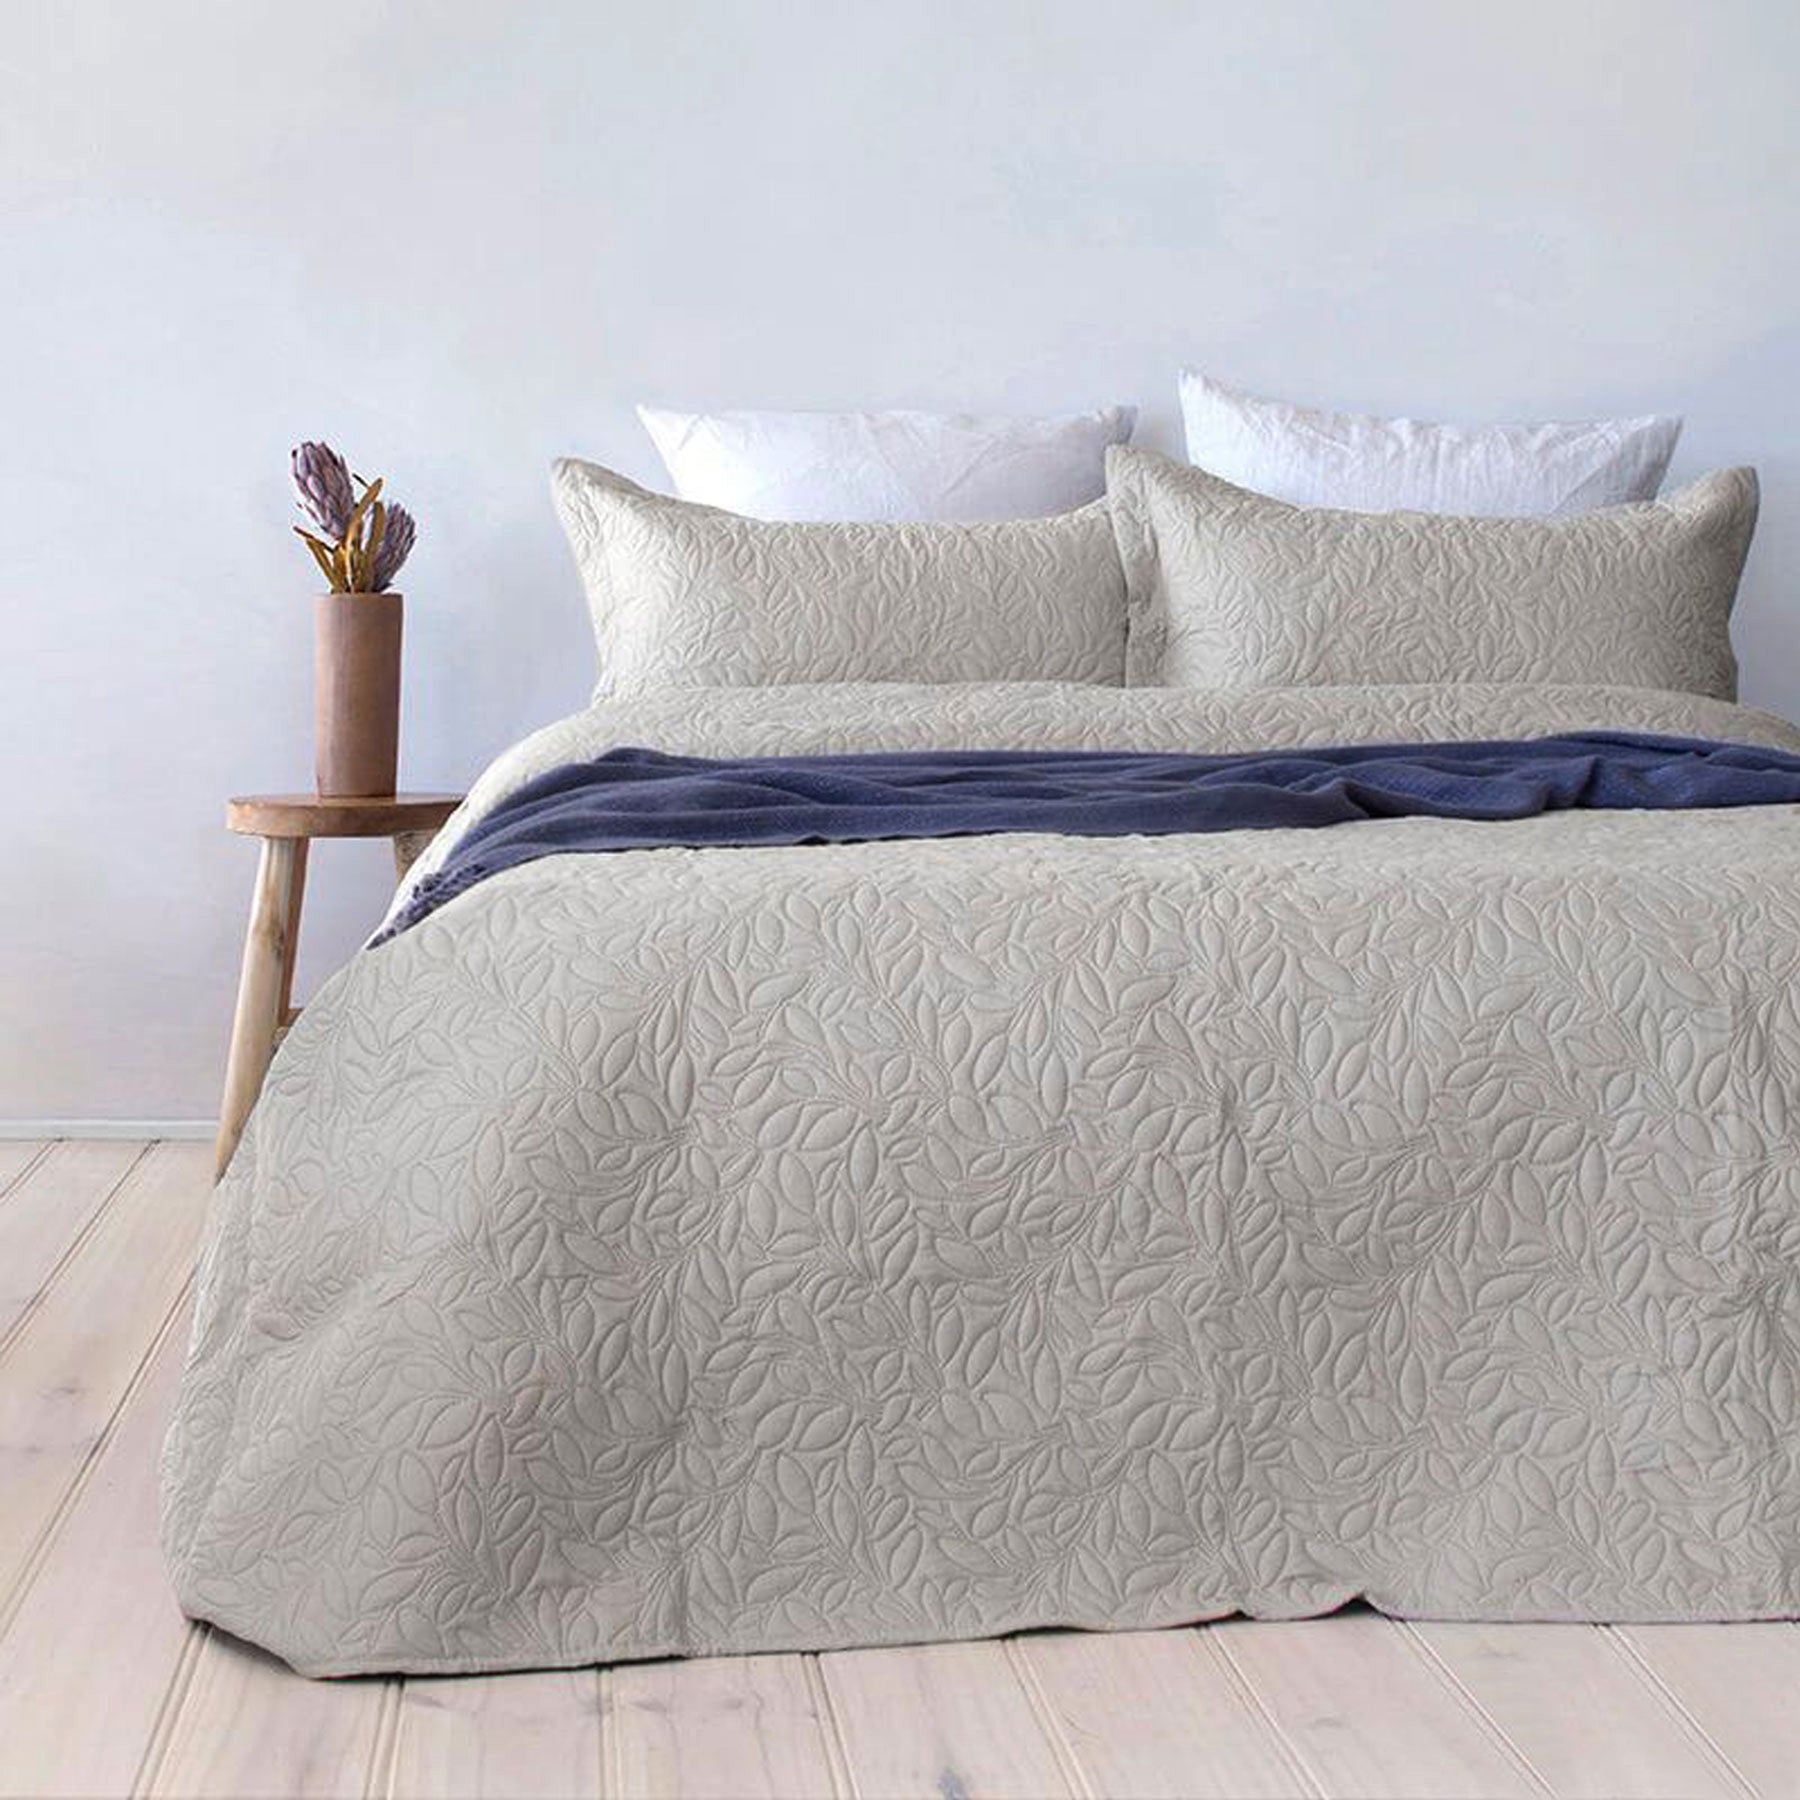 Botanica Embossed Coverlet Set Queen/King by Bambury available in 5 Colors